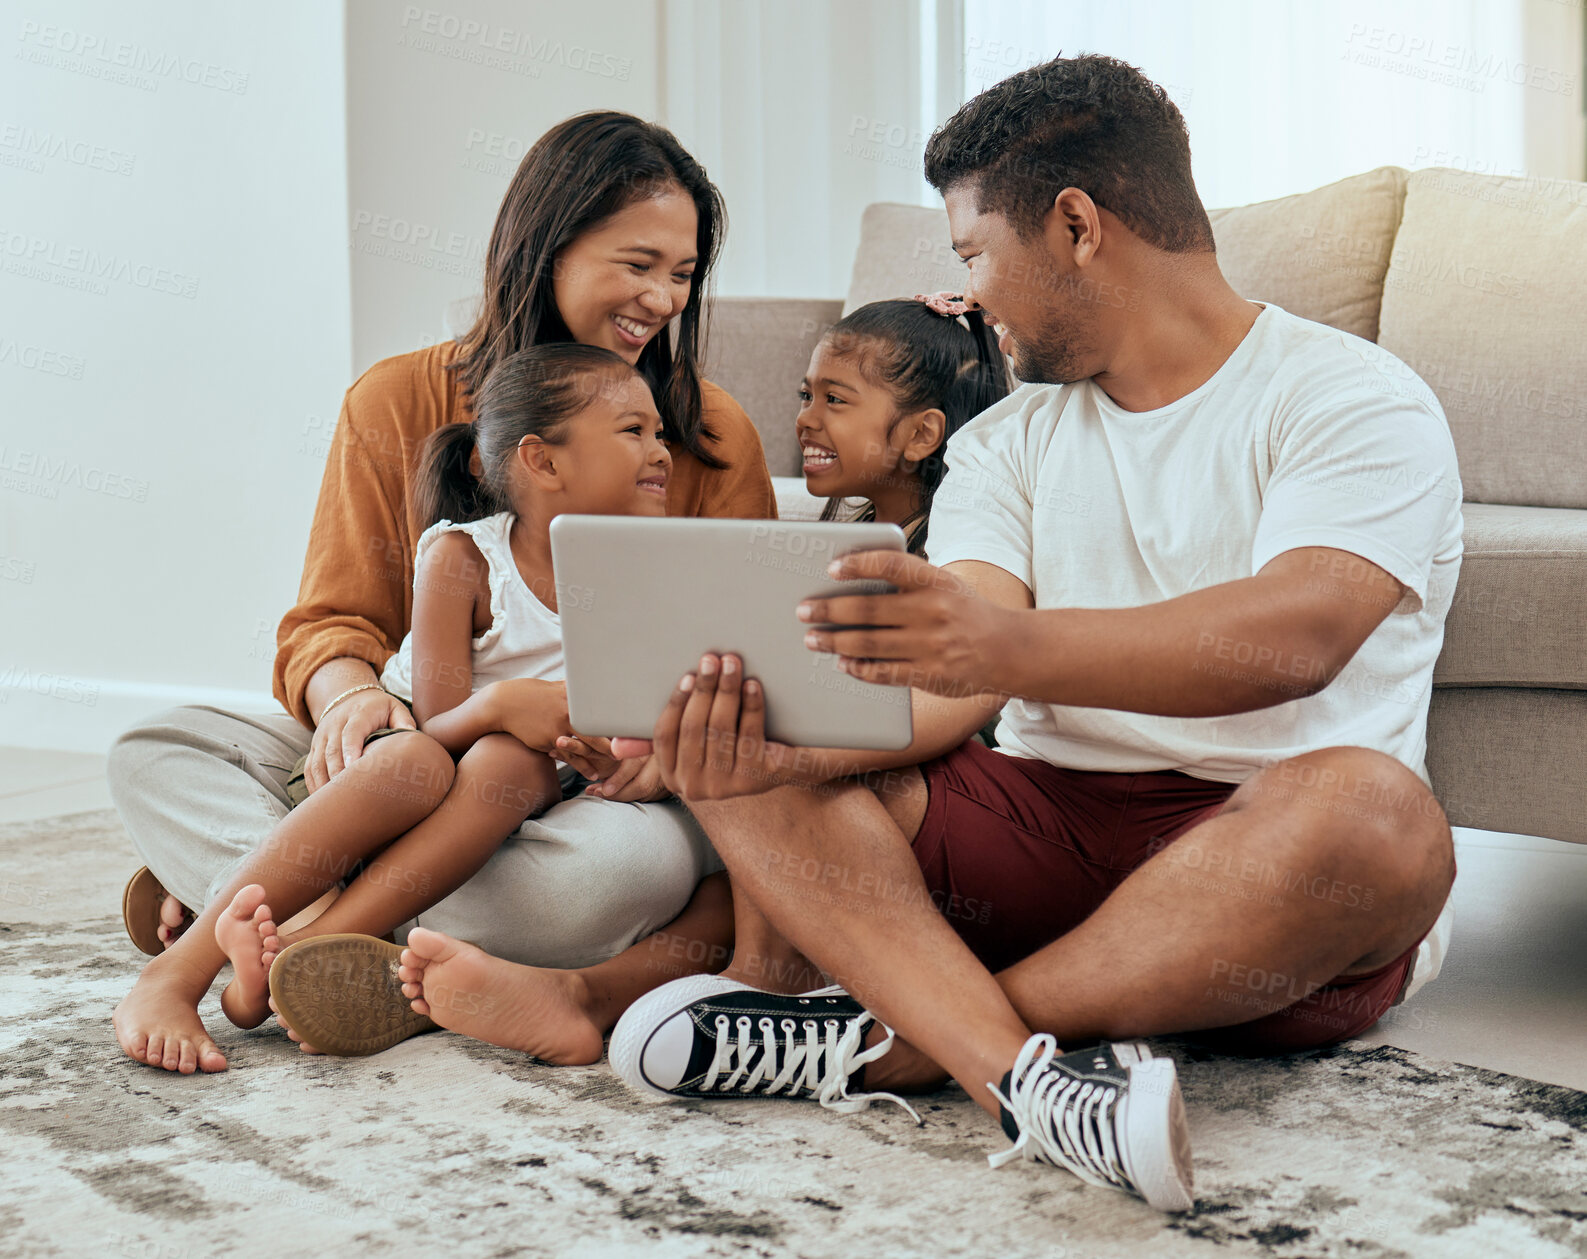 Buy stock photo Family in living room, children smile with tablet video call online or streaming movies in Indonesia home. Indian mother sitting on floor, kids watch content on digital technology and happy father